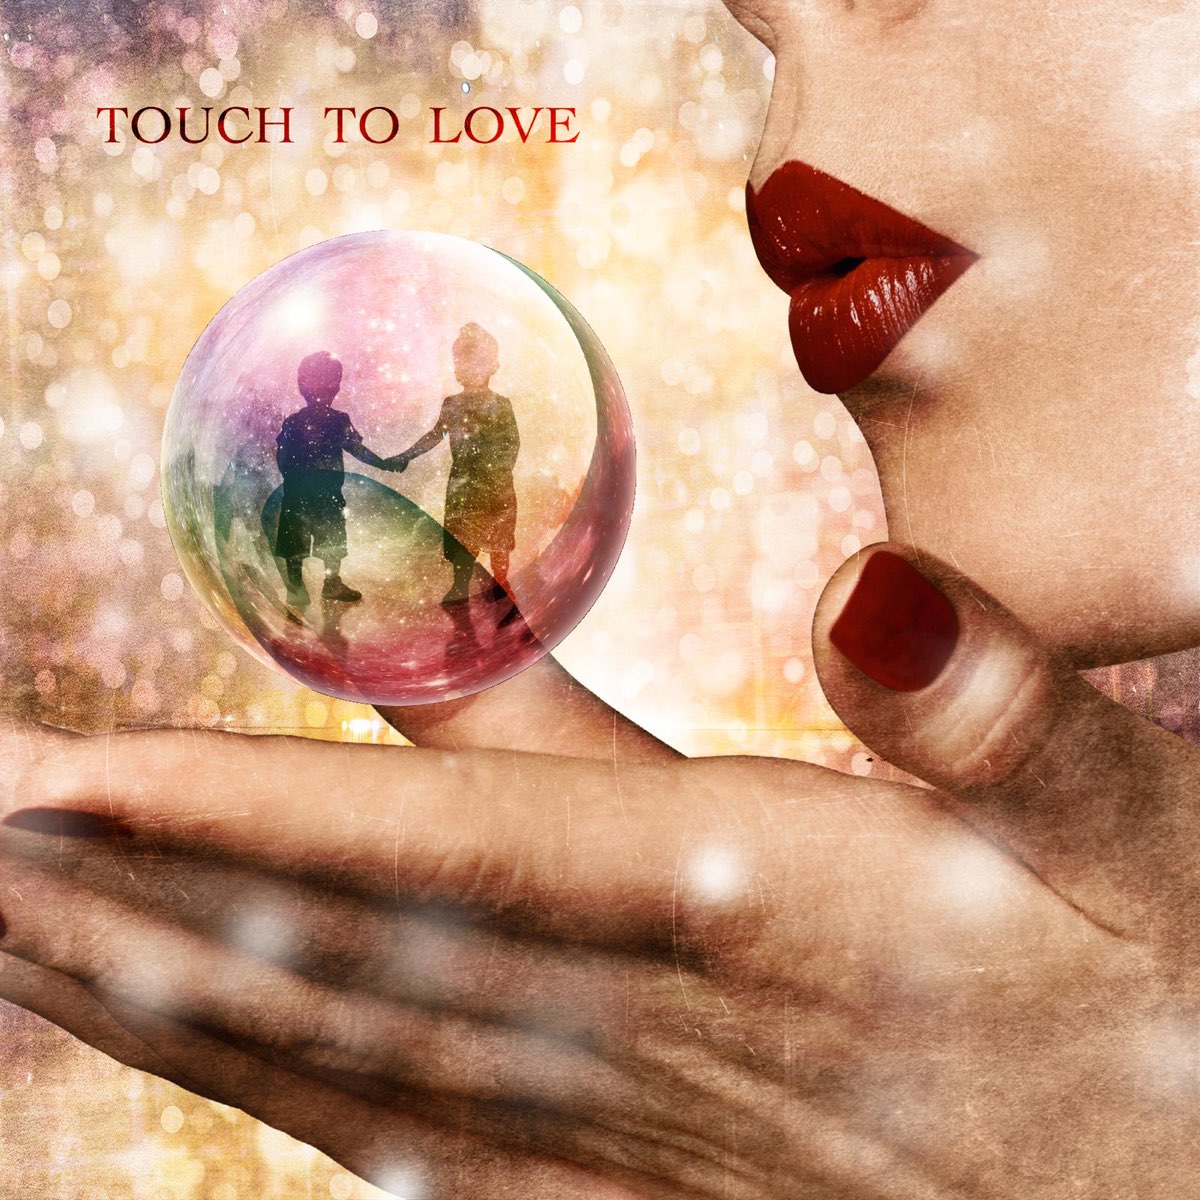 A Touch of Love. To Touch. To Touch смысл. Love to Love Touch me.